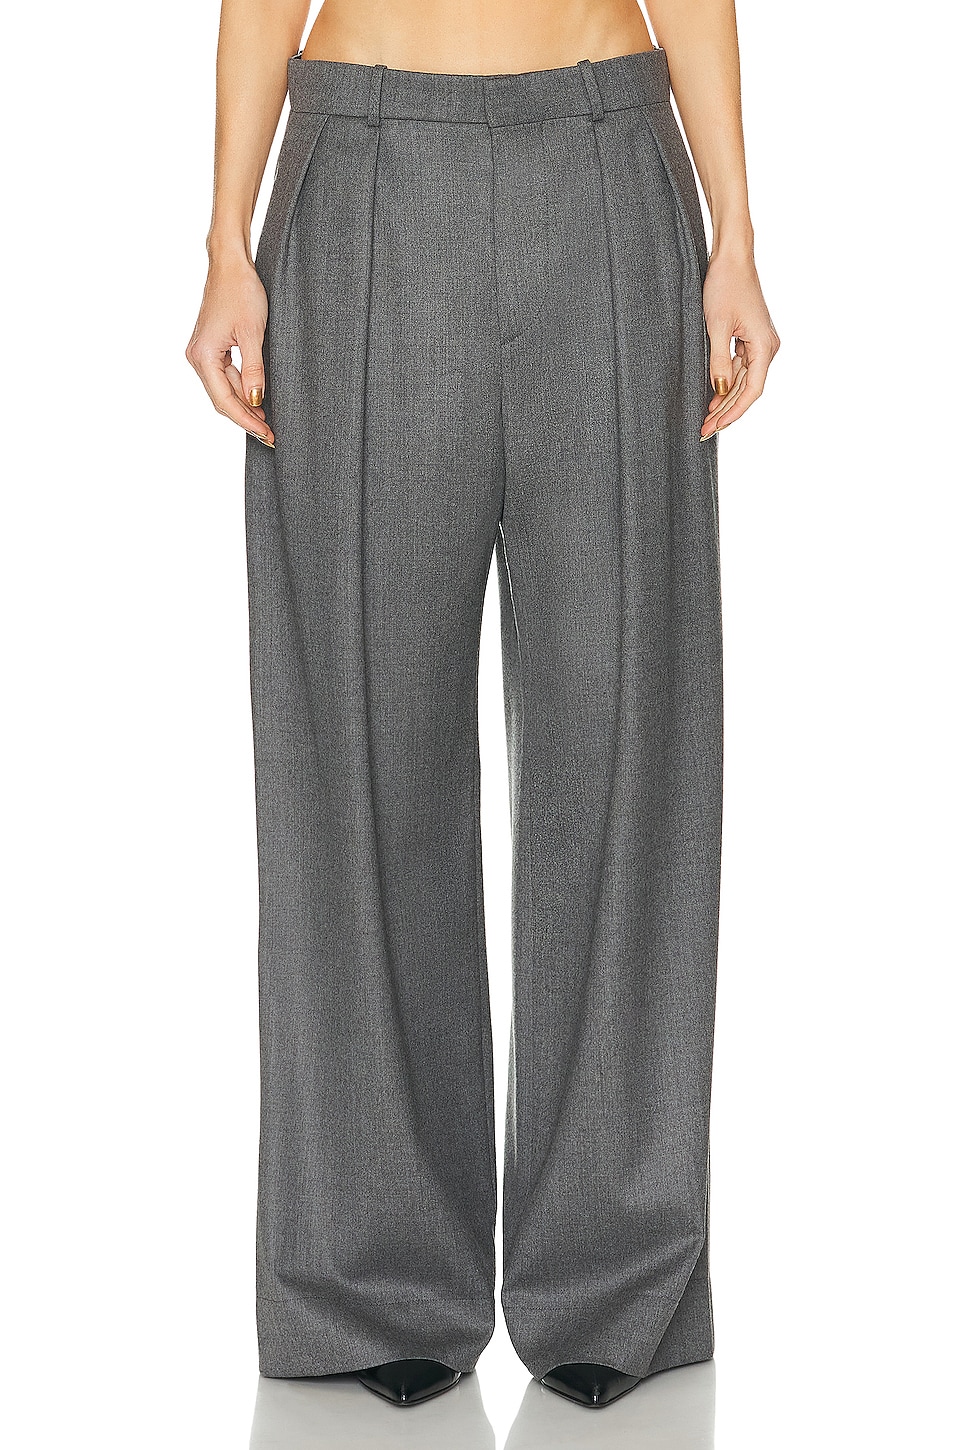 Image 1 of WARDROBE.NYC Low Rise Trouser in Charcoal